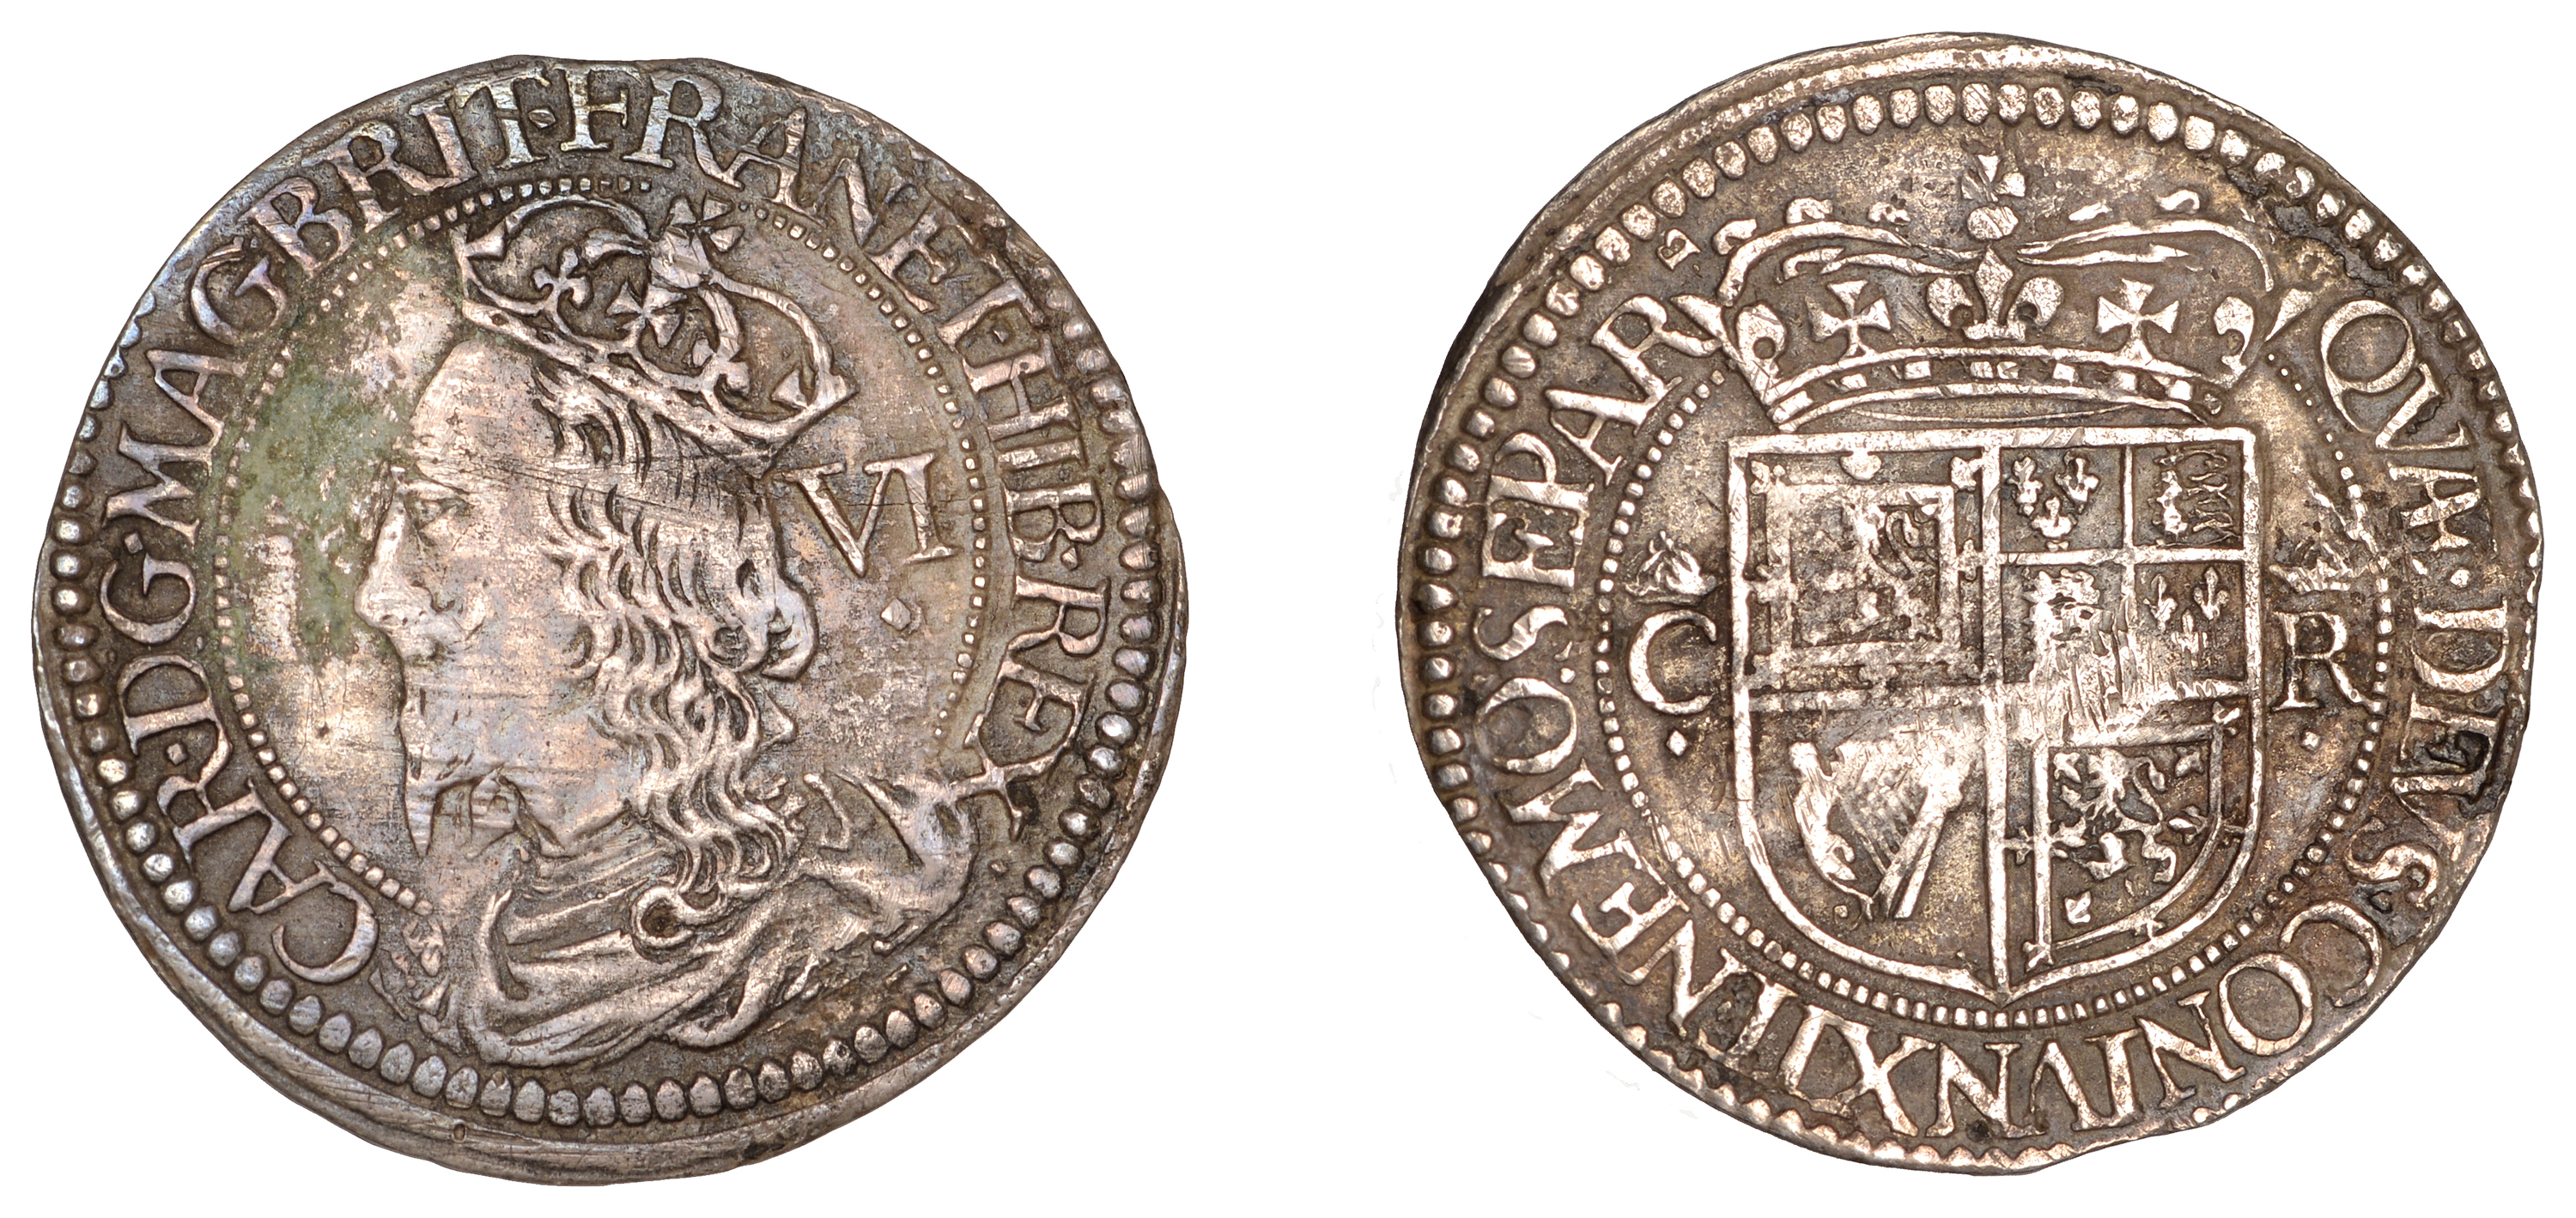 Charles I (1625-1649), Third coinage, Briot's issue, Six Shillings, no mm., signed b both si...